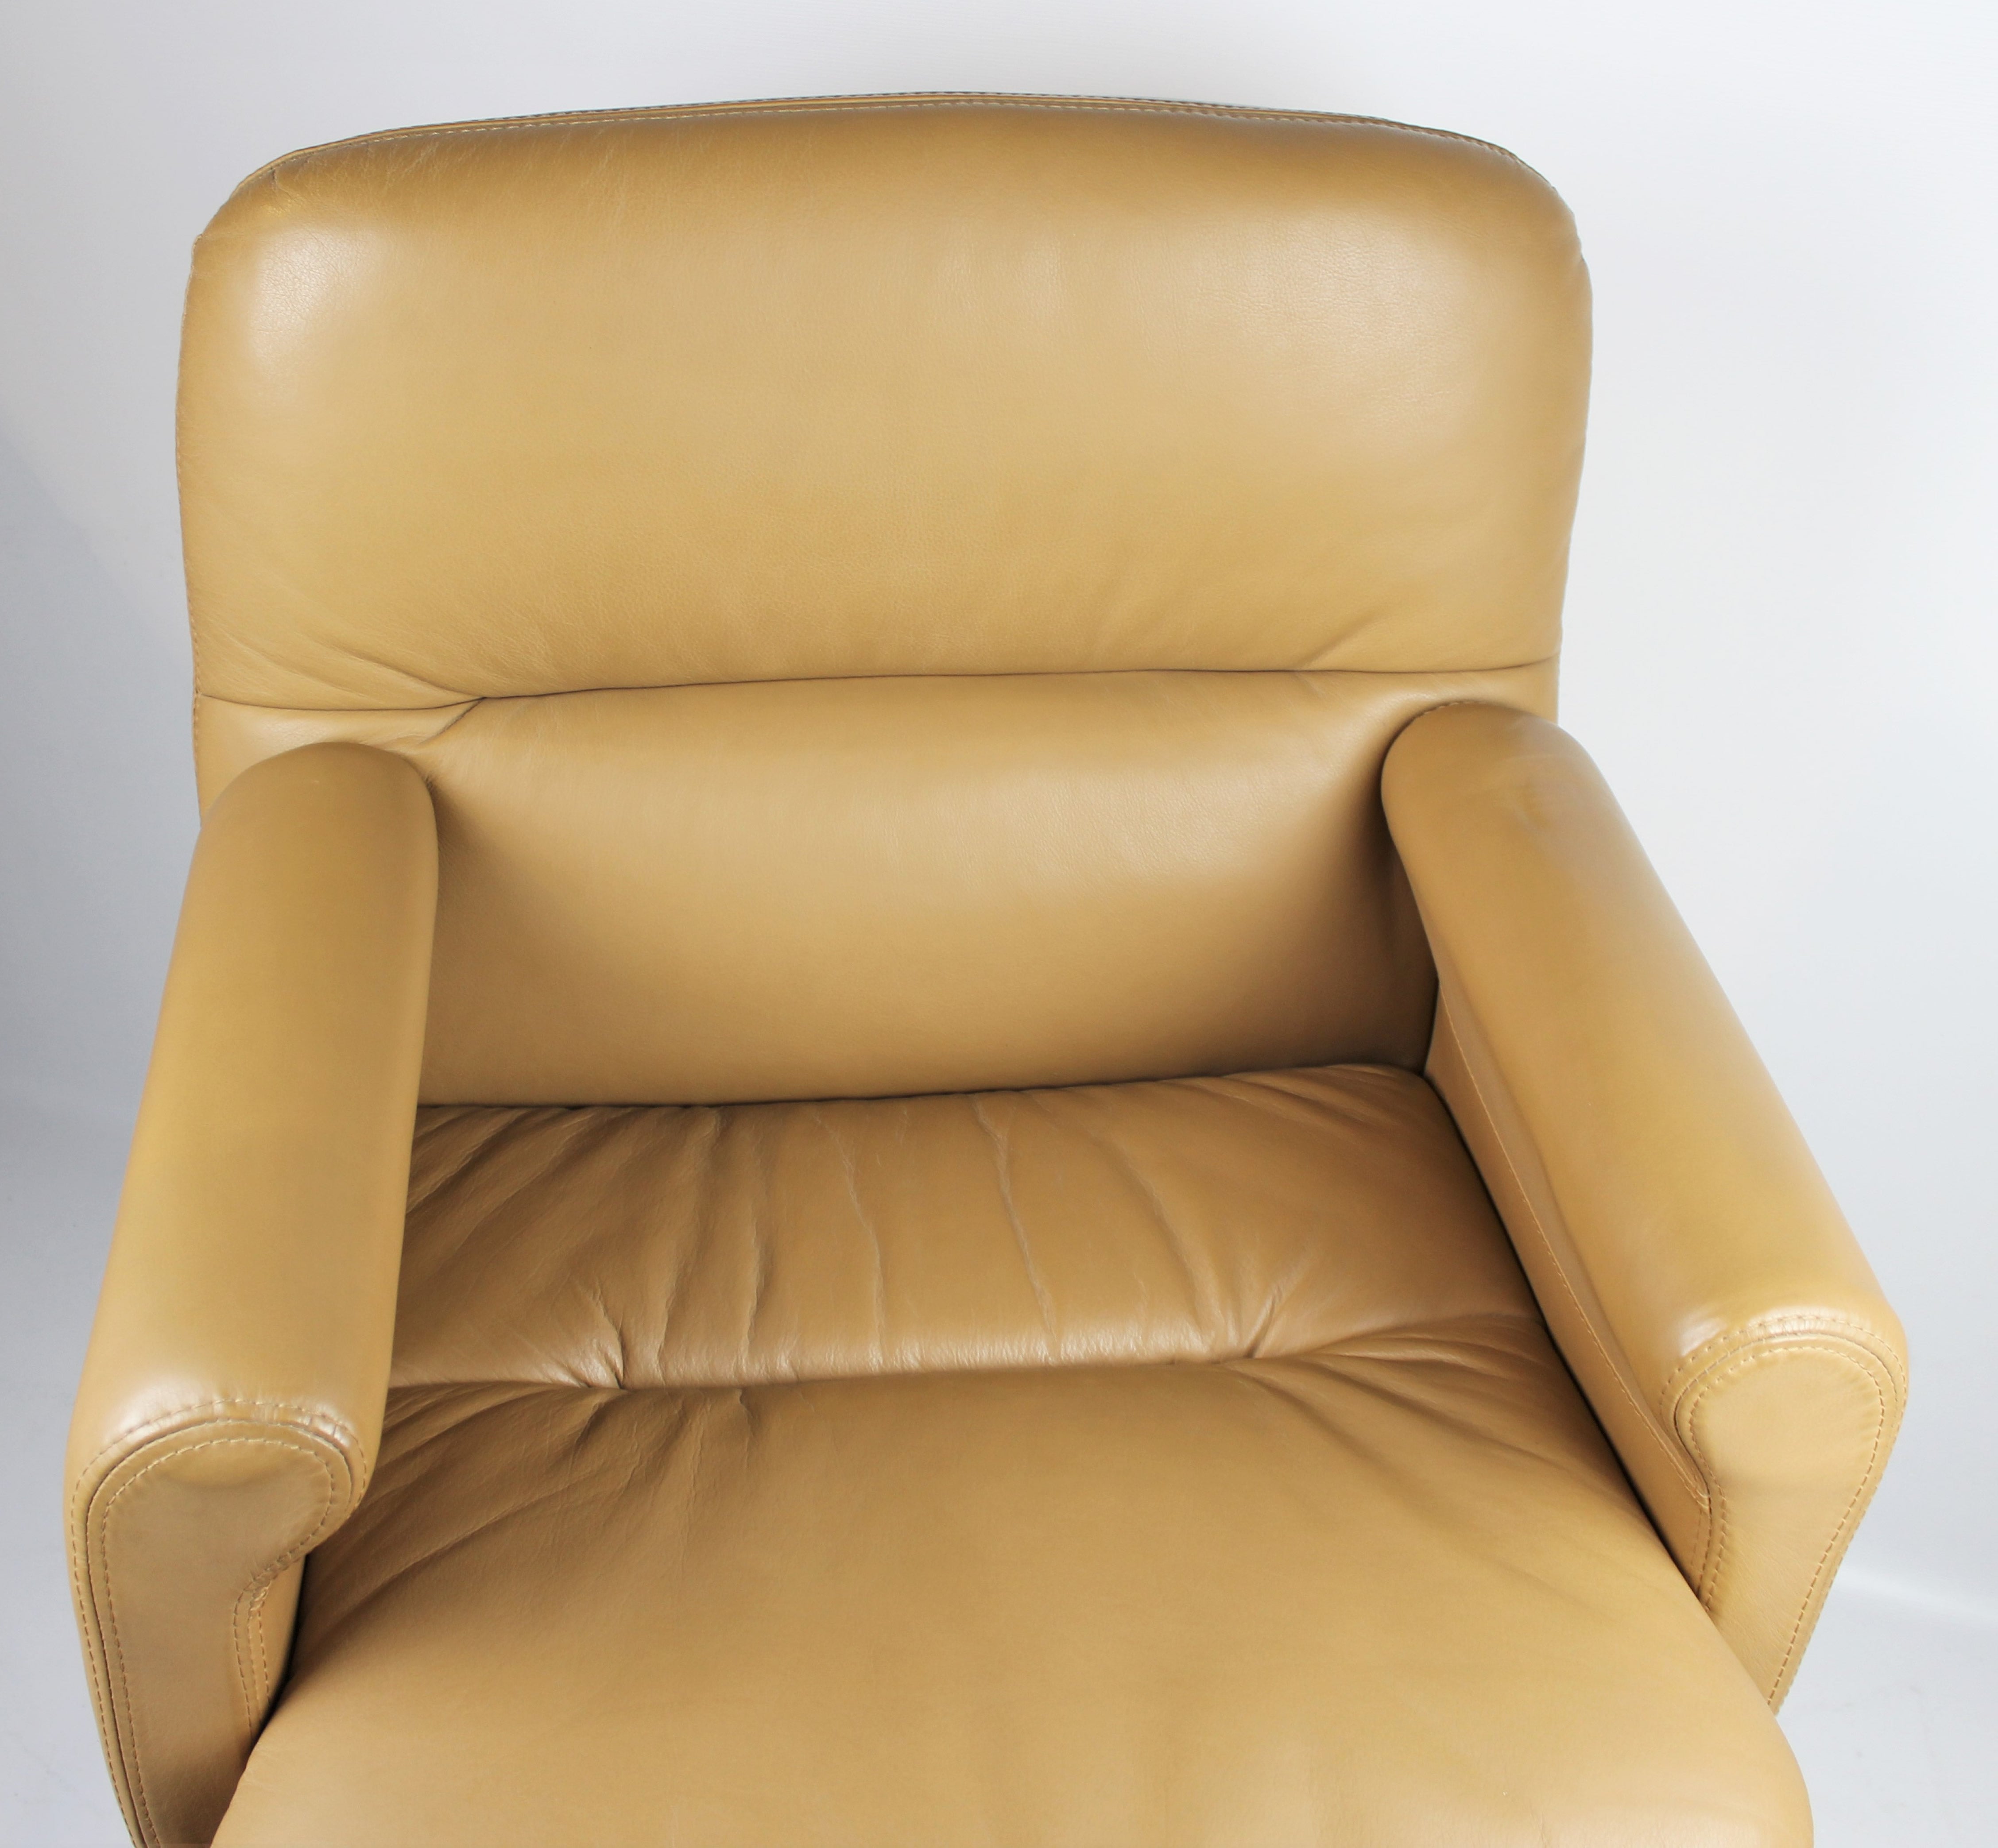 Traditional Beige Leather Office Chair - HSN-B019